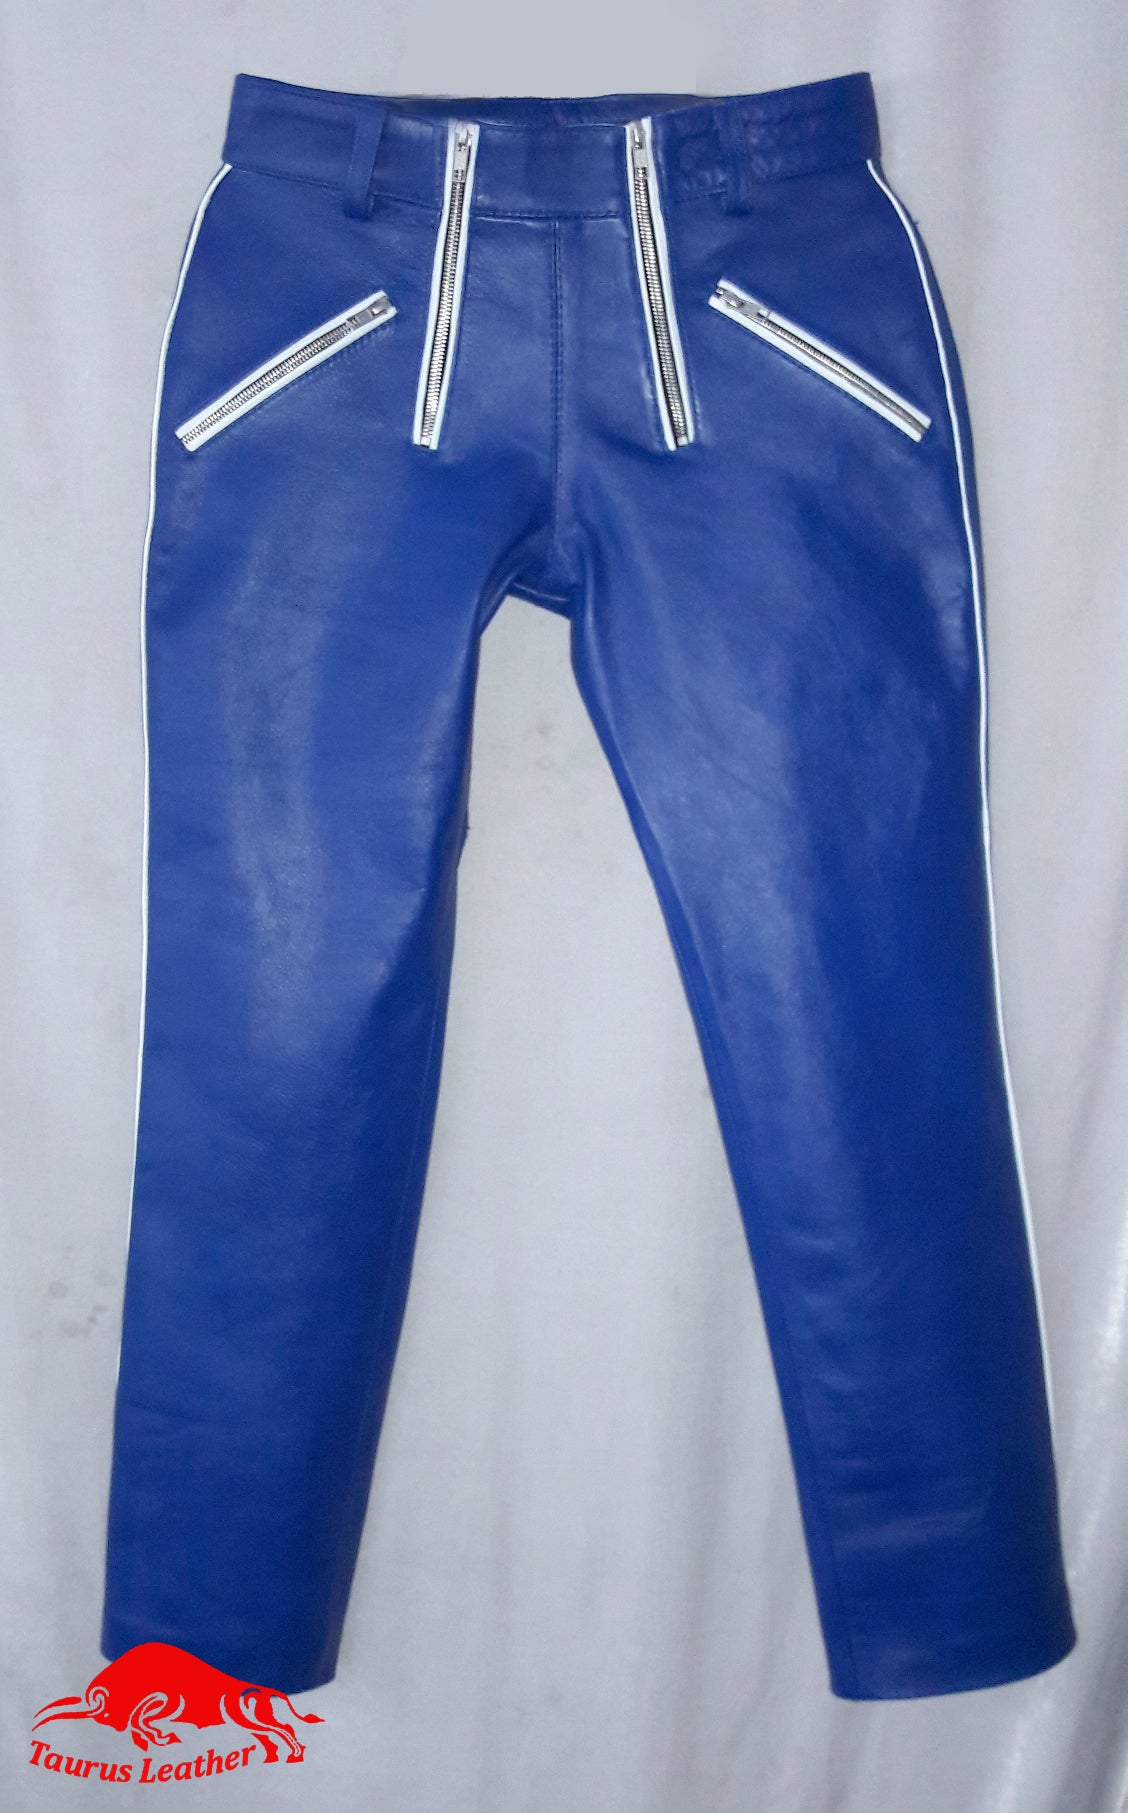 TAURUS LEATHER Navy Blue Sheep Leather Pant With White Trimming